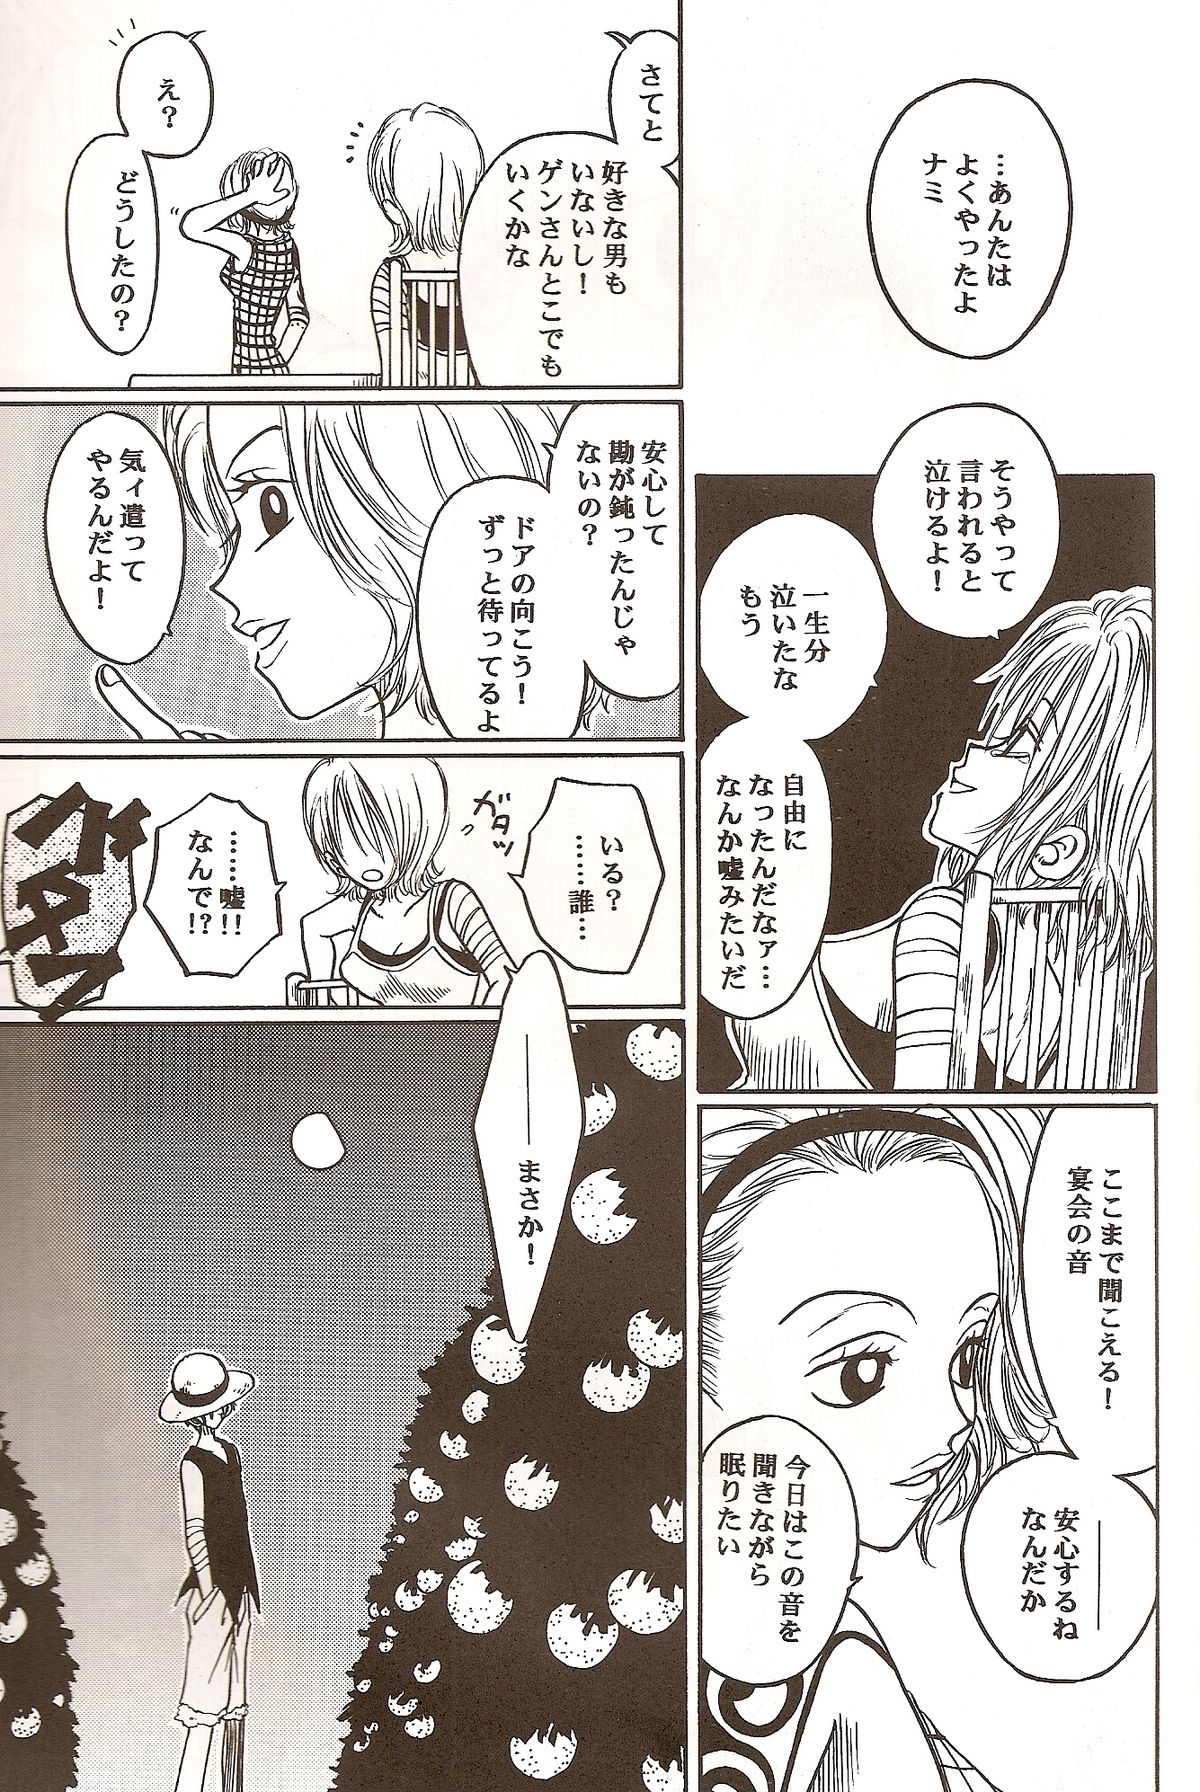 Route [One Piece] page 15 full